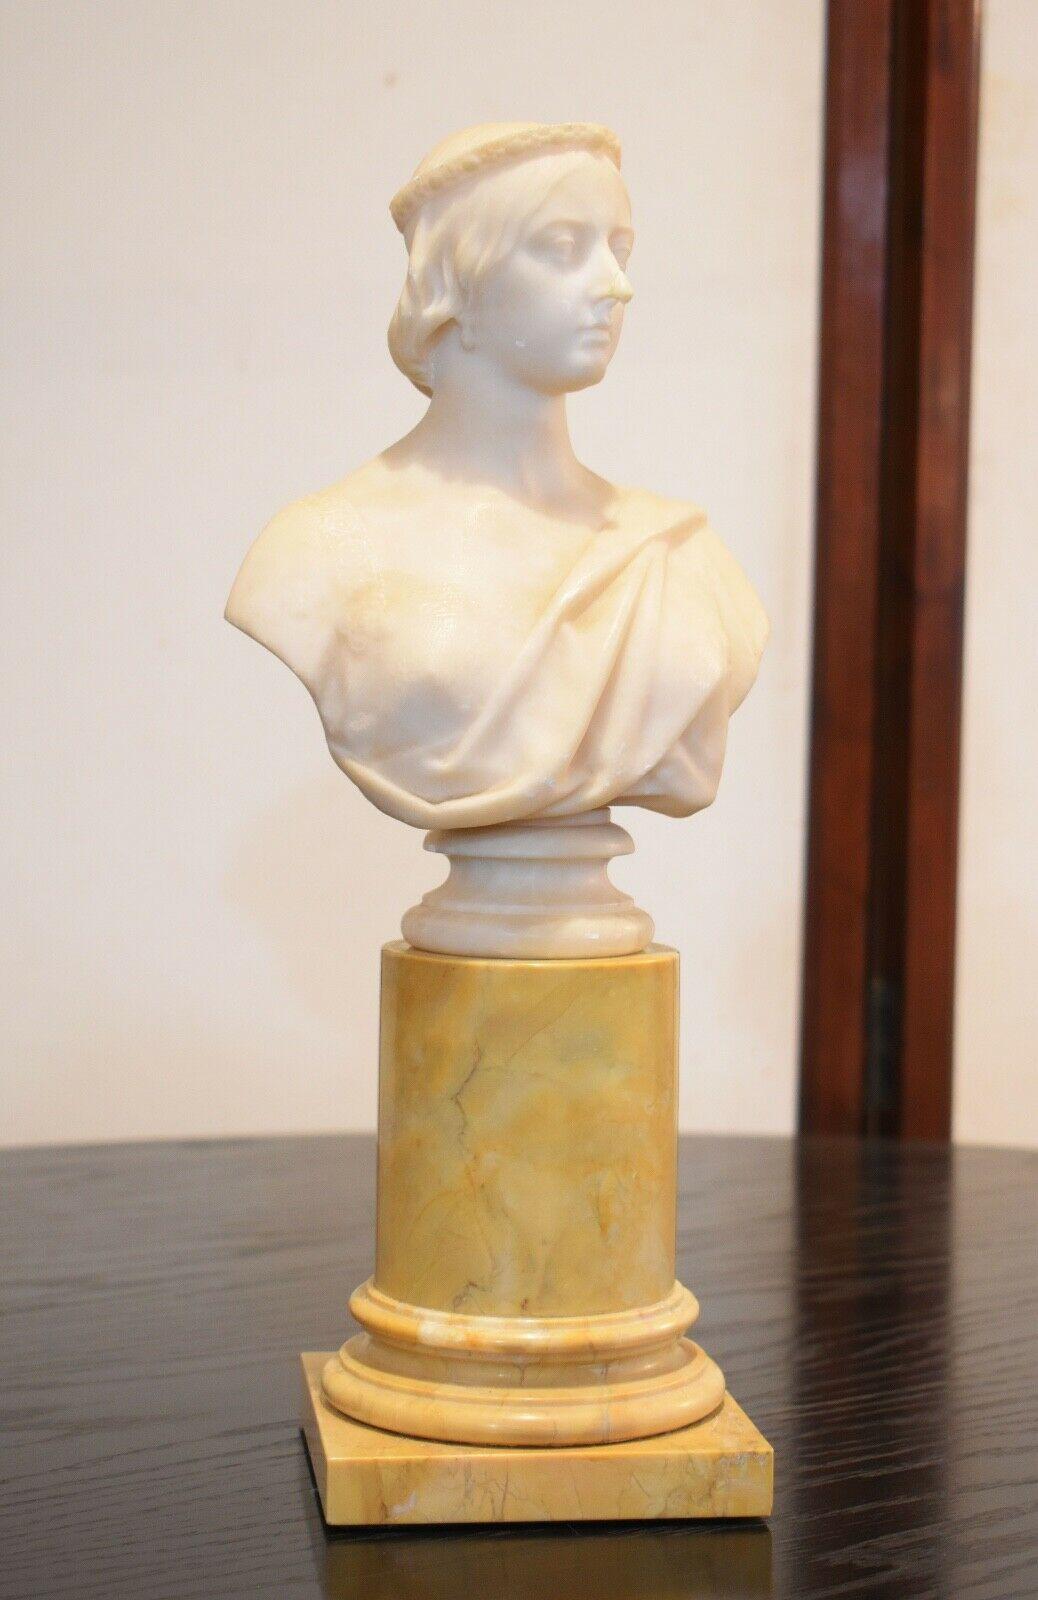 A beautiful bust of Queen Victoria made from Alabaster and set on an Ochre marble column attributed to Matthew Noble.